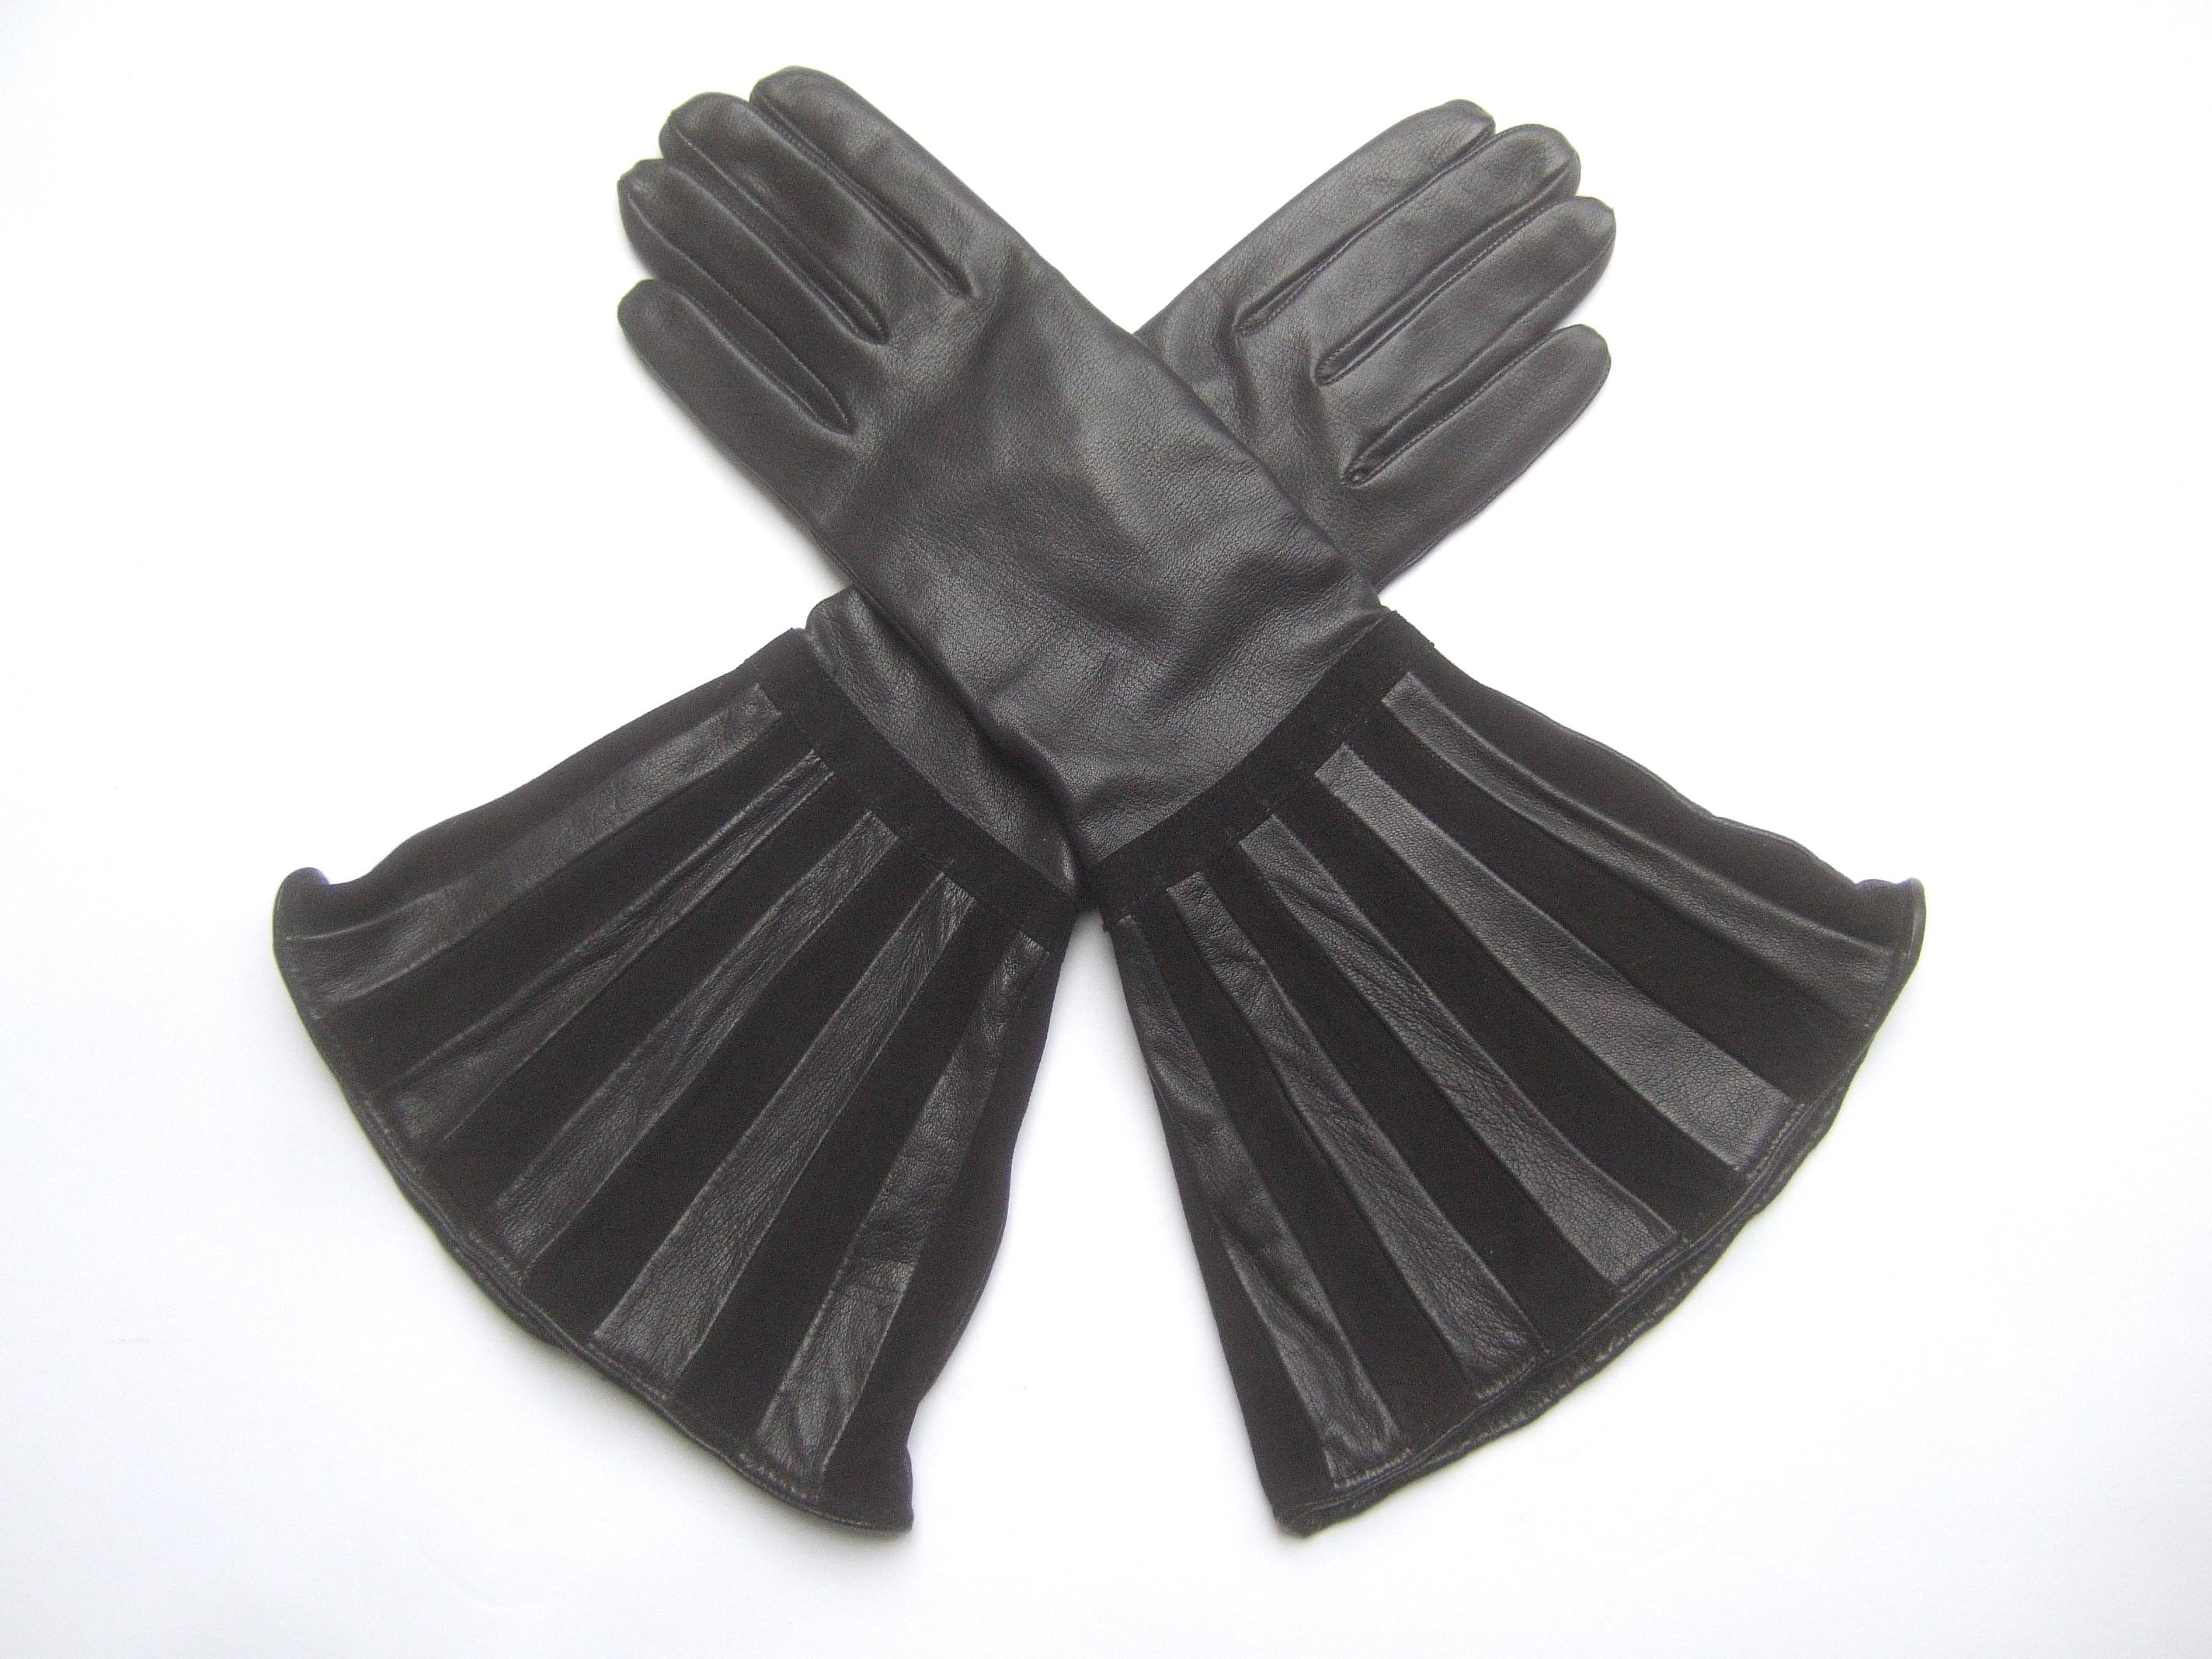 Saks Fifth Avenue Avant-garde black leather & suede trim gloves c 1980s 
The chic gloves are constructed with smooth buttery soft leather. The wide flared openings are designed with striped bands that alternate from smooth black leather to plush